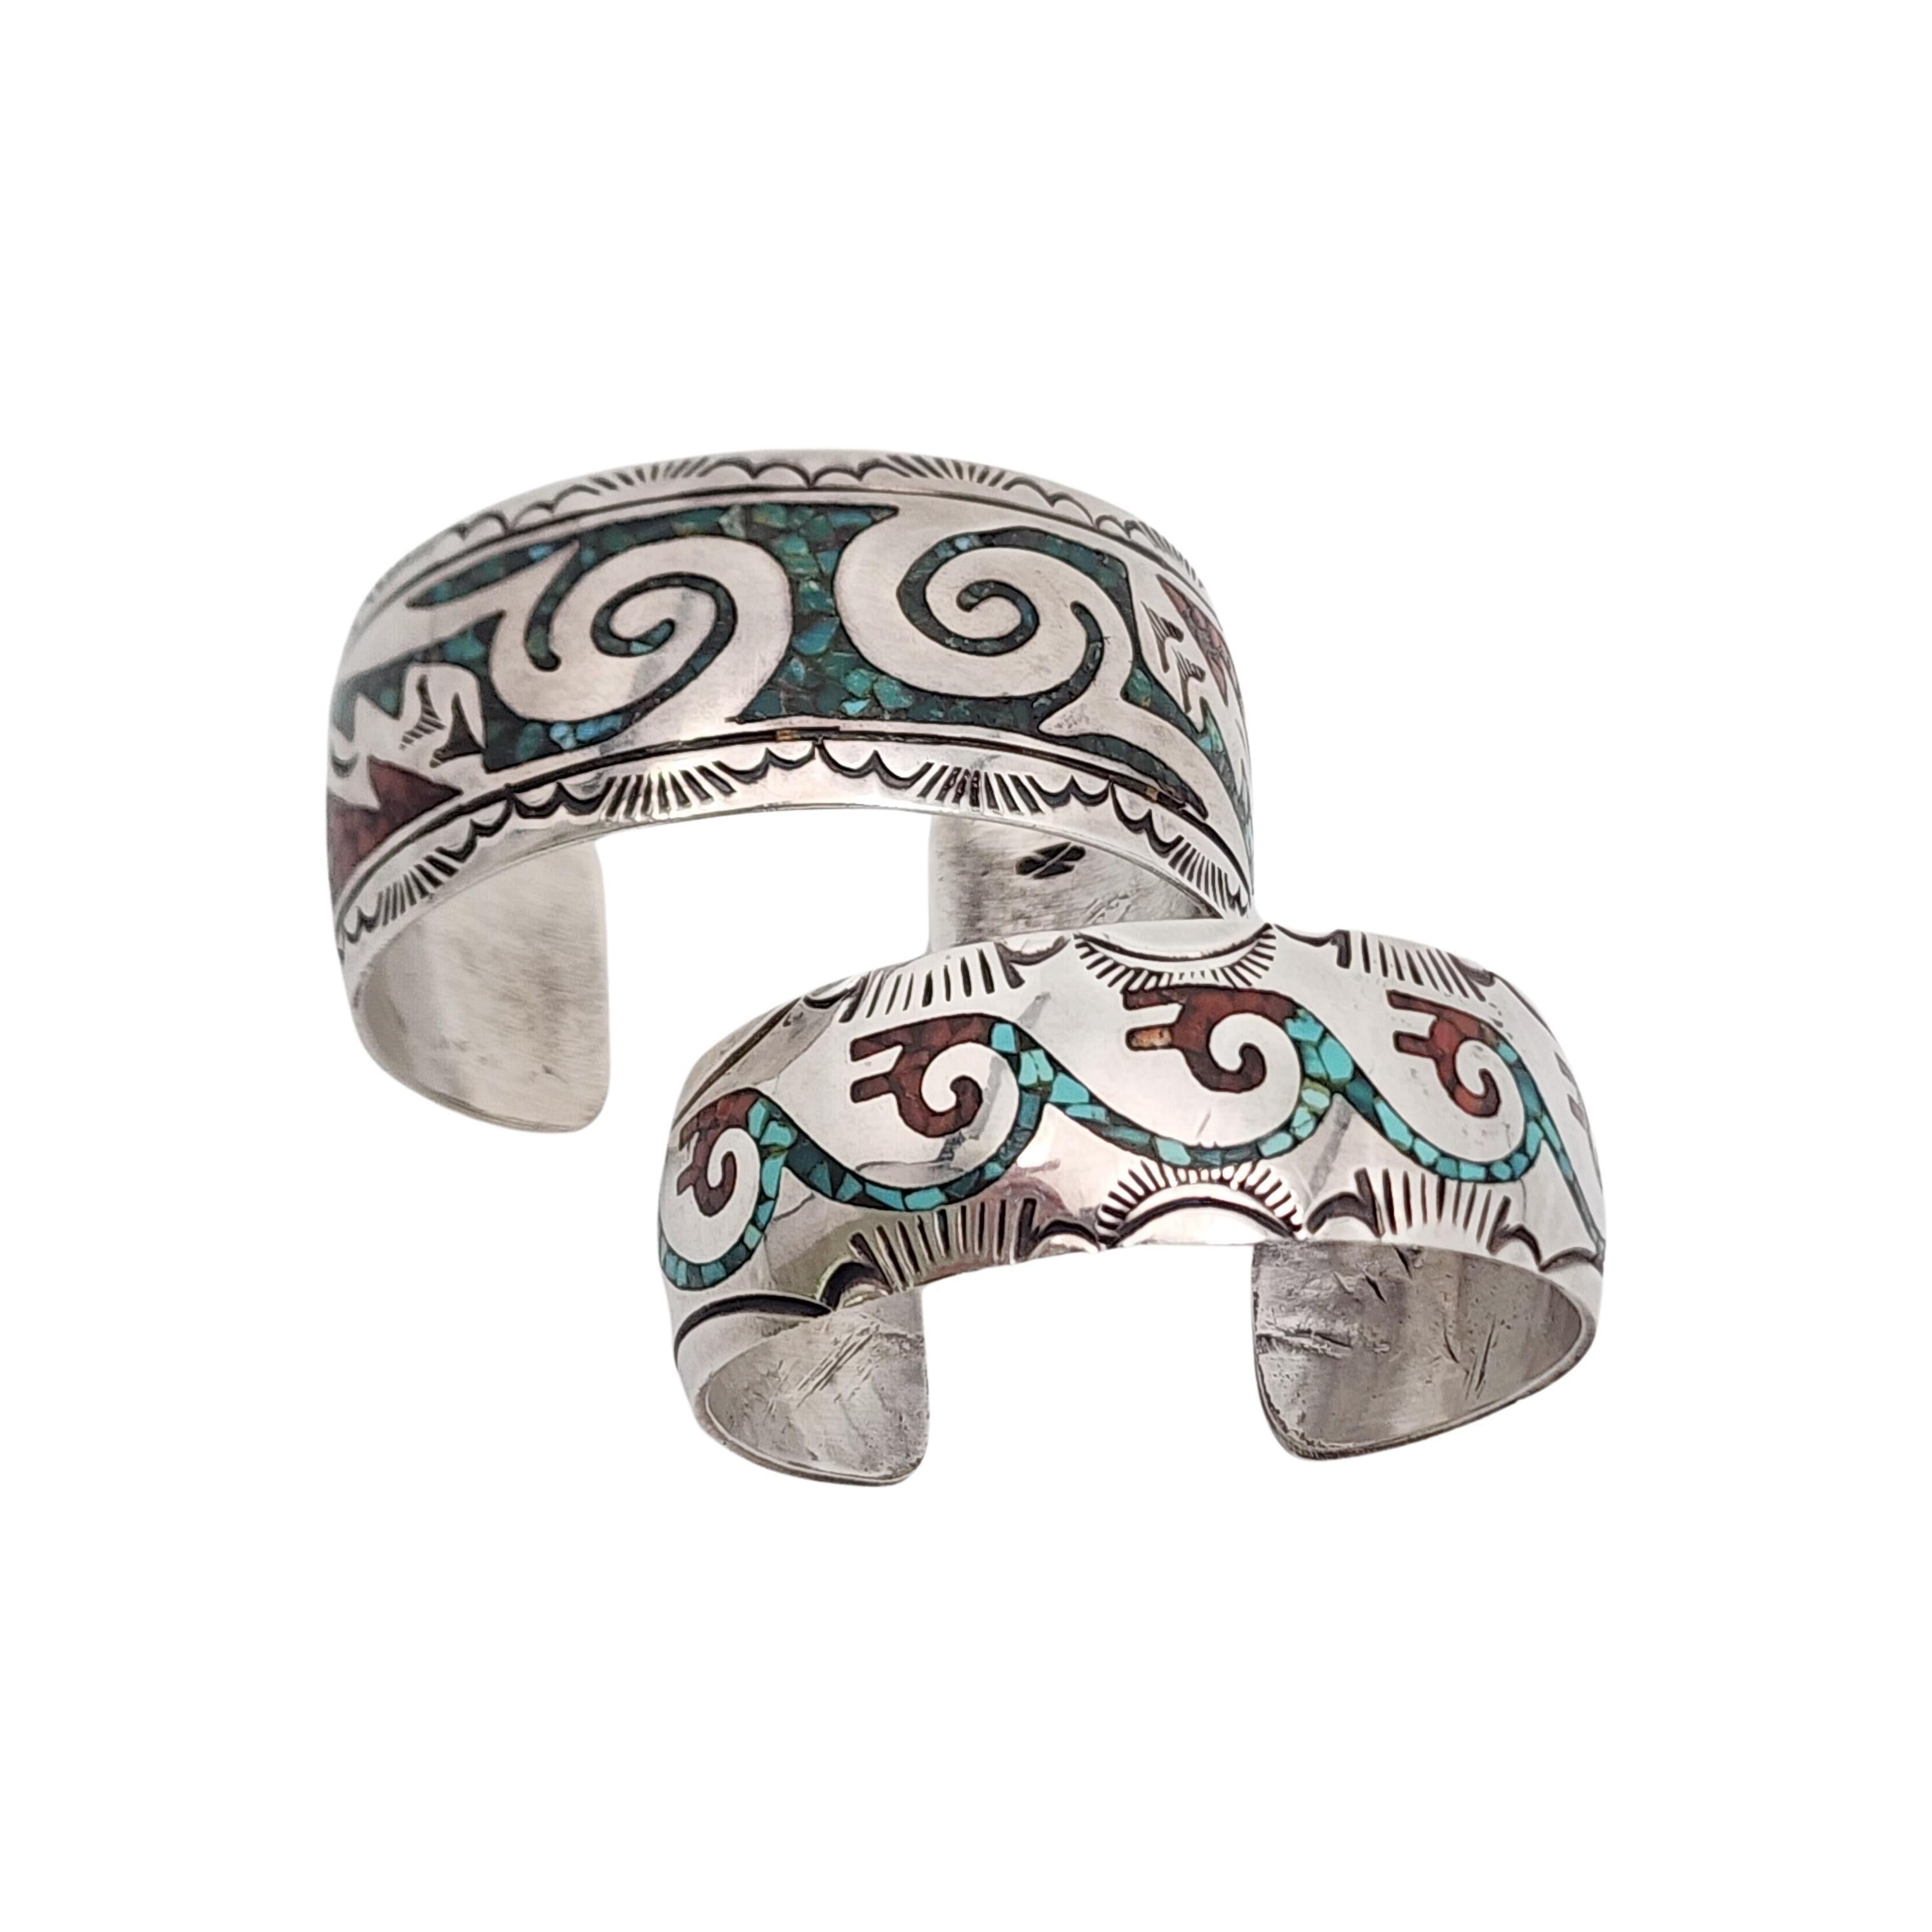 Women's Set of 2 Native American Crushed Turquoise Silver Cuff Bracelets #15358 For Sale